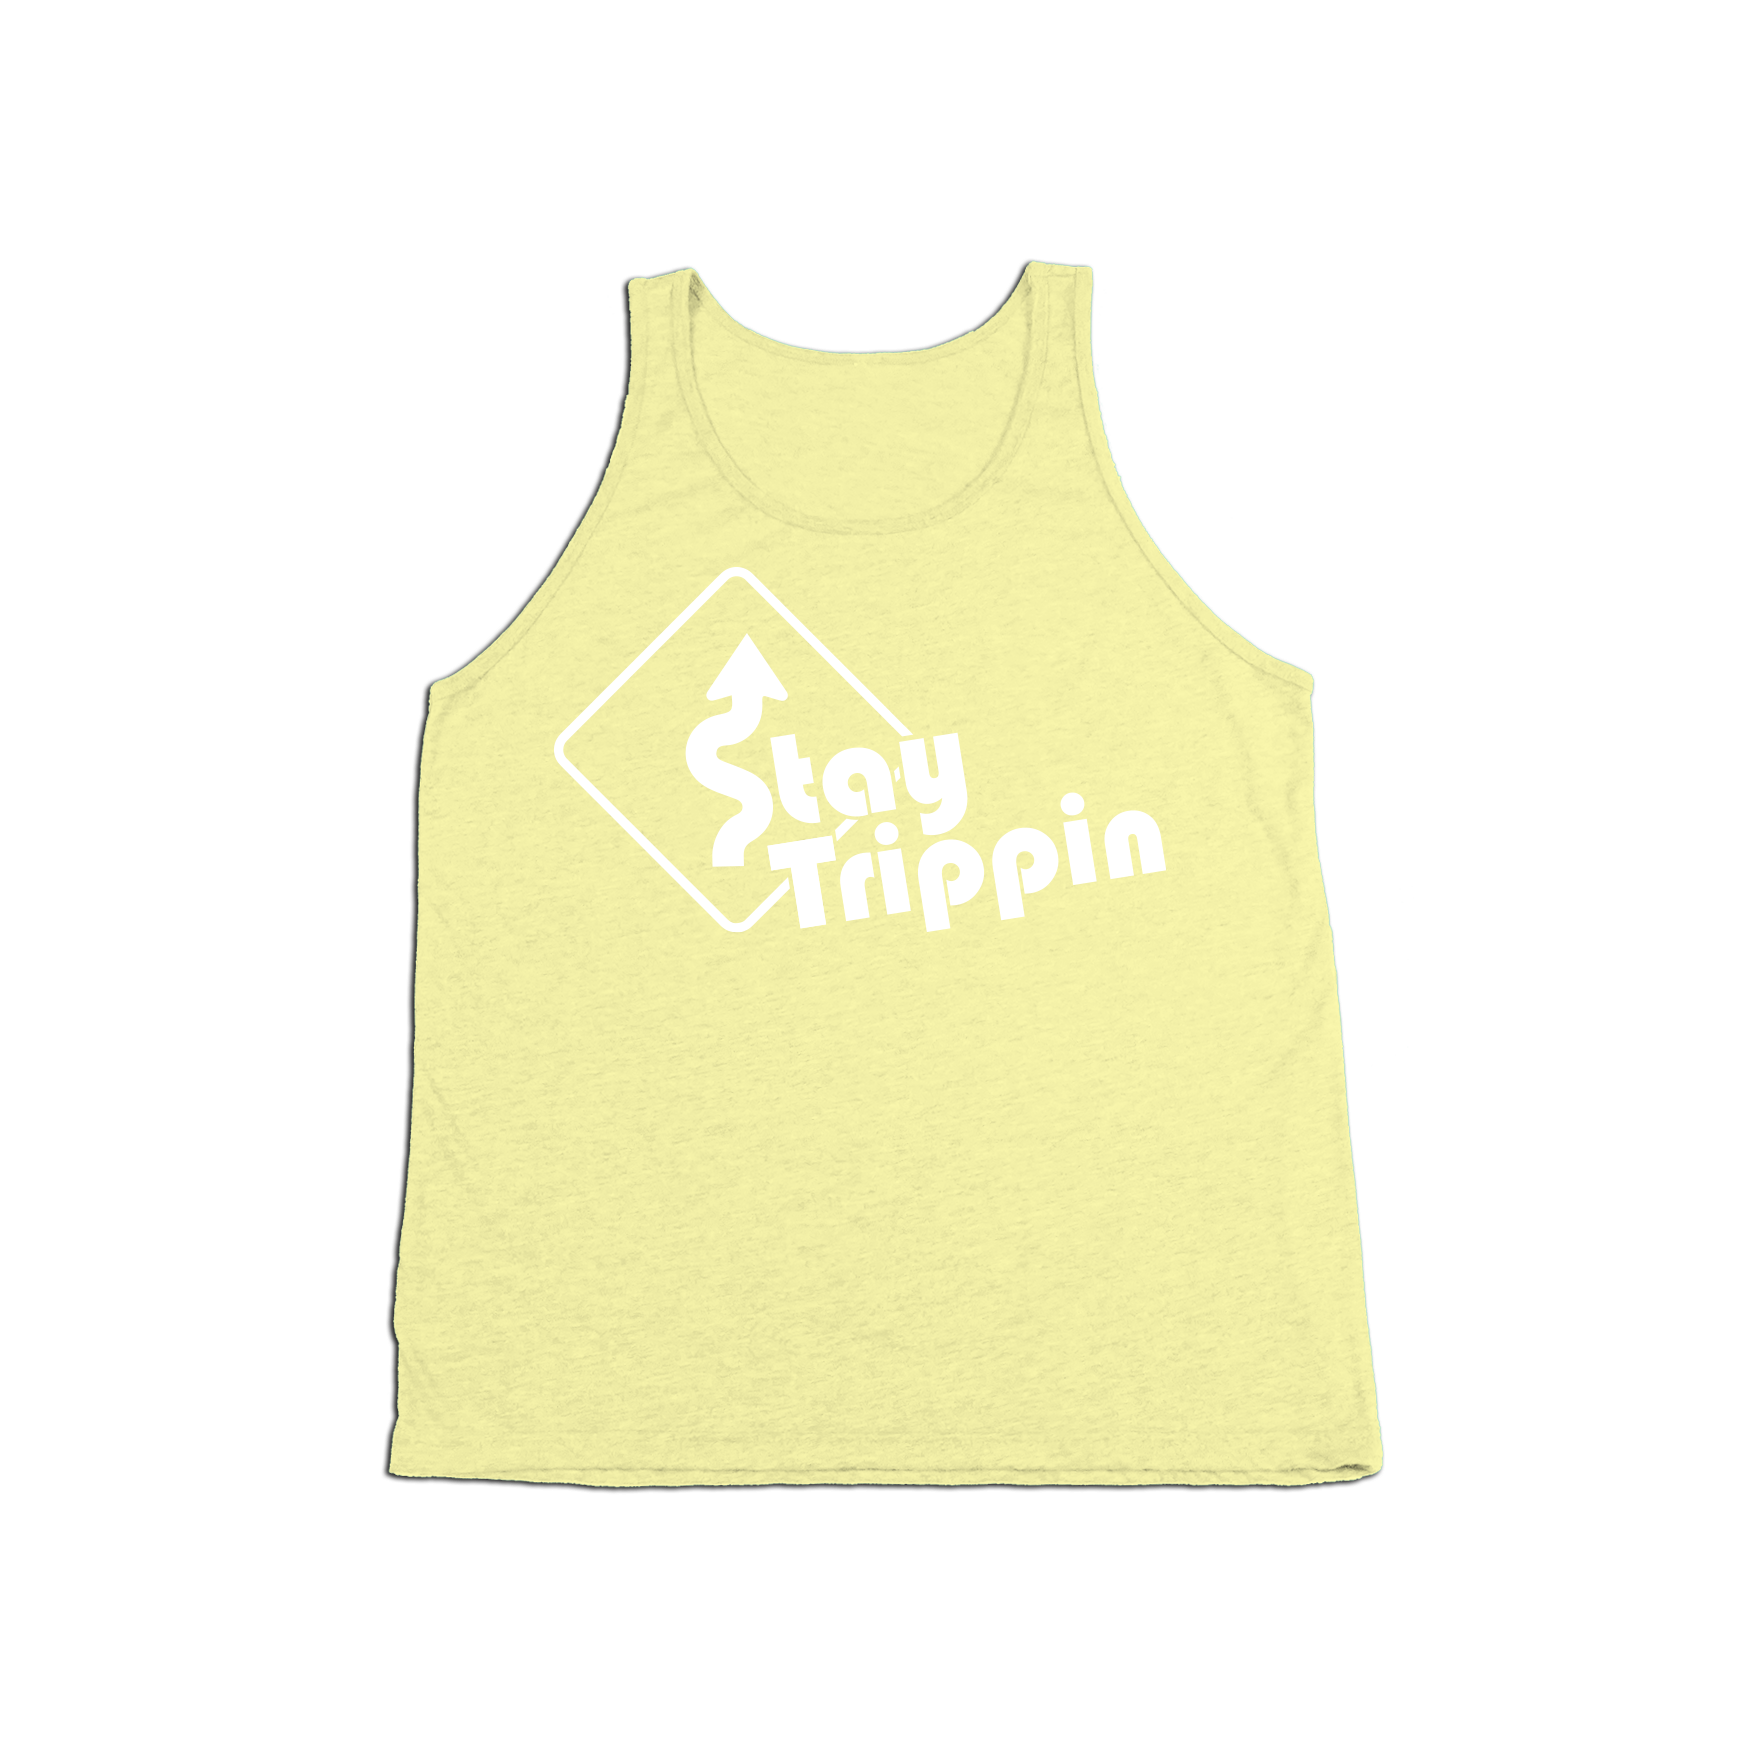 #STAYTRIPPIN SIGN YOUTH Tank Top - Hat Mount for GoPro